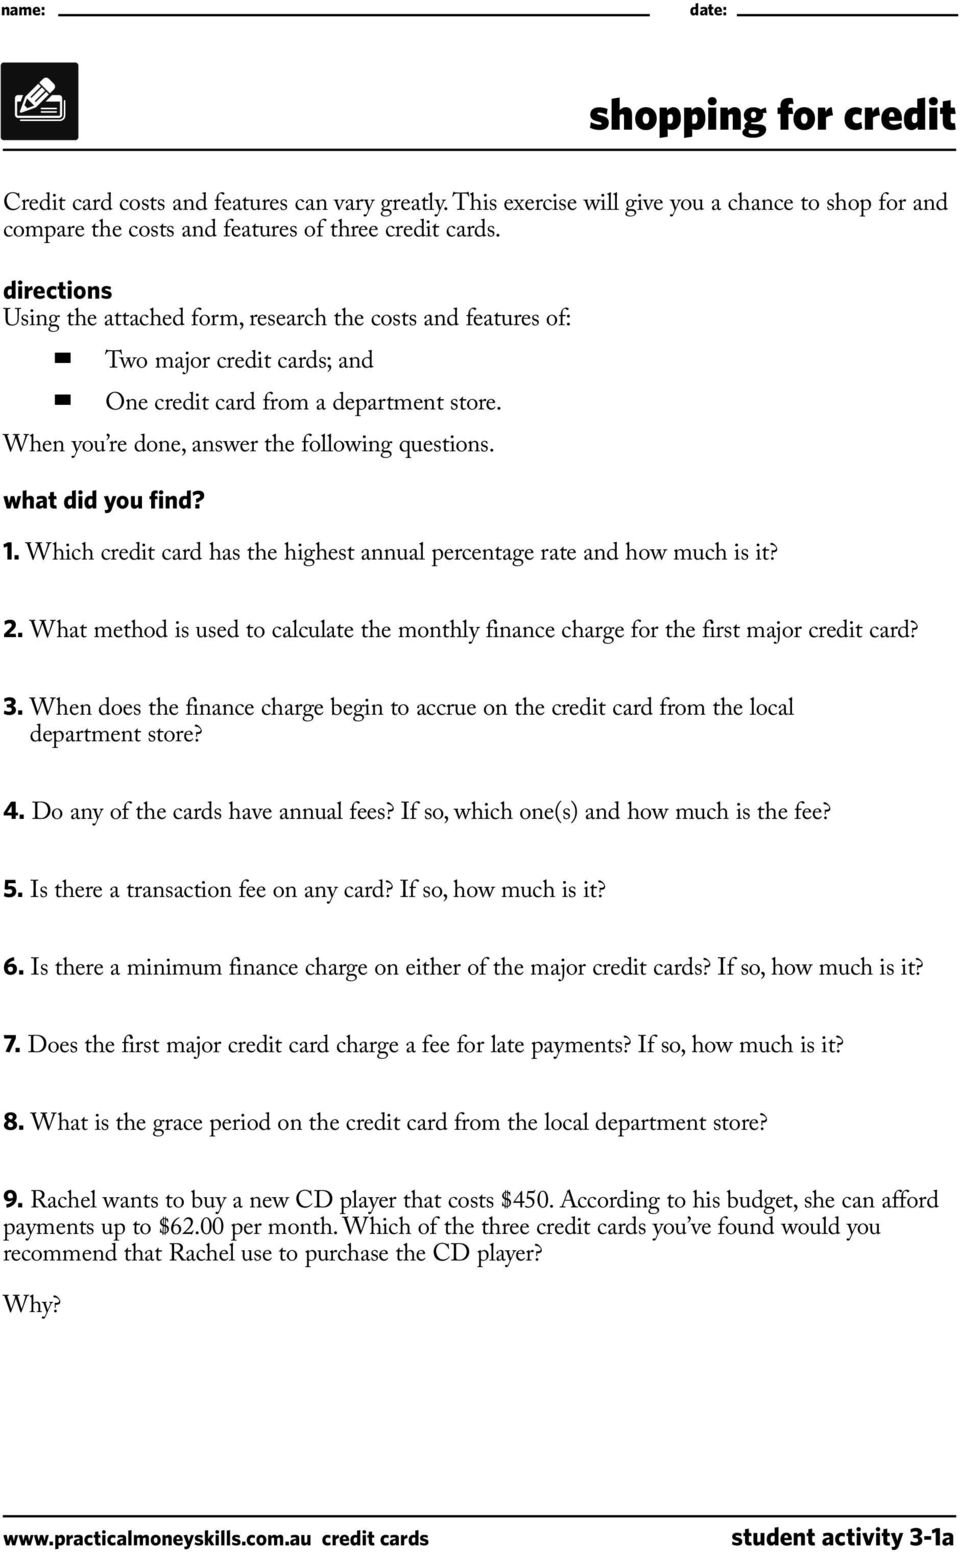 Student Activities Lesson Three Credit Cards 0713  Pdf Intended For Shopping For A Mortgage Worksheet Answers